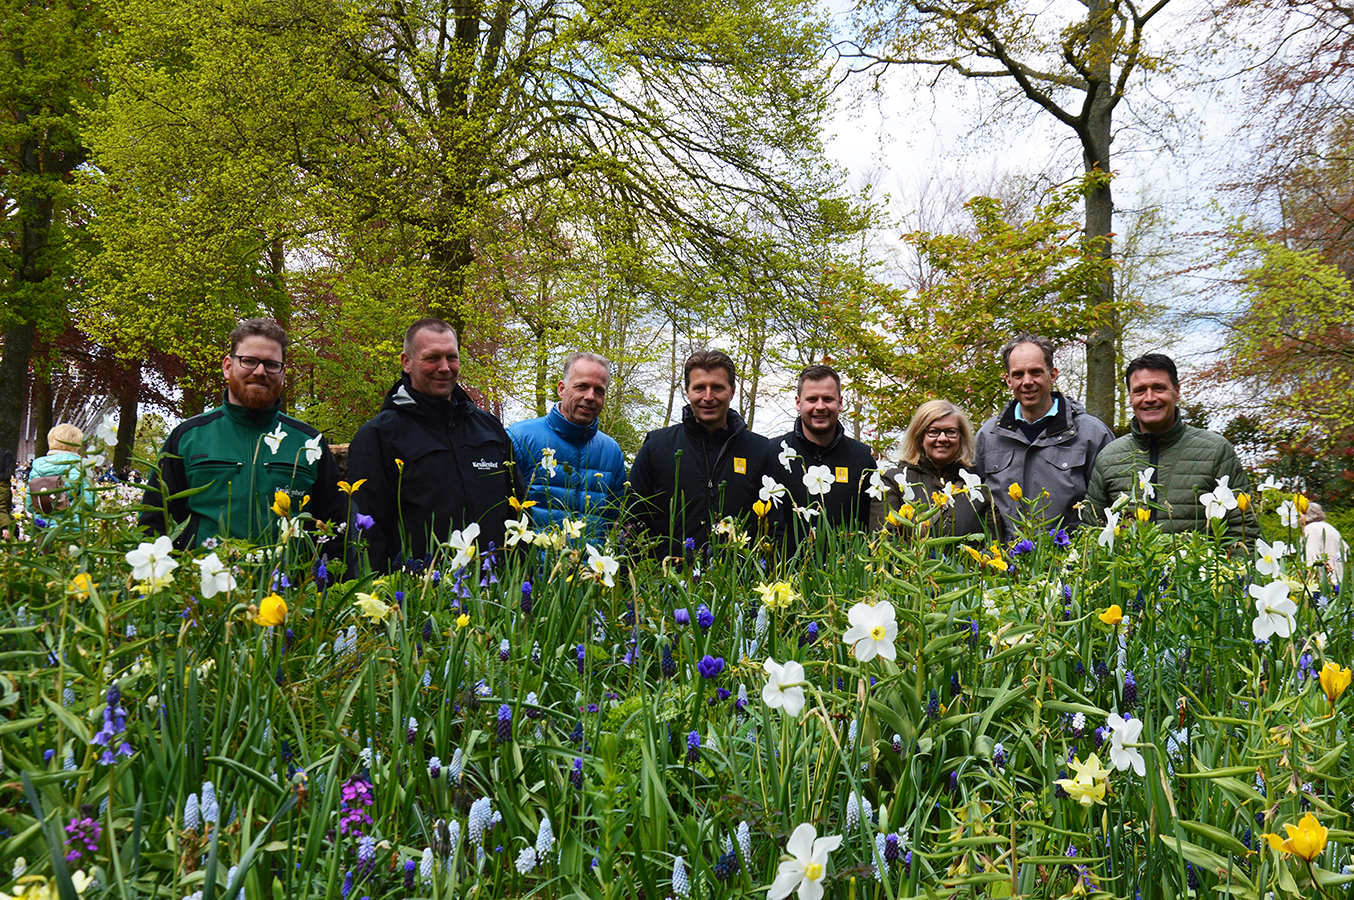 Special mix of naturalising bulbs and perennials attracts lots of attention at Keukenhof (NL)